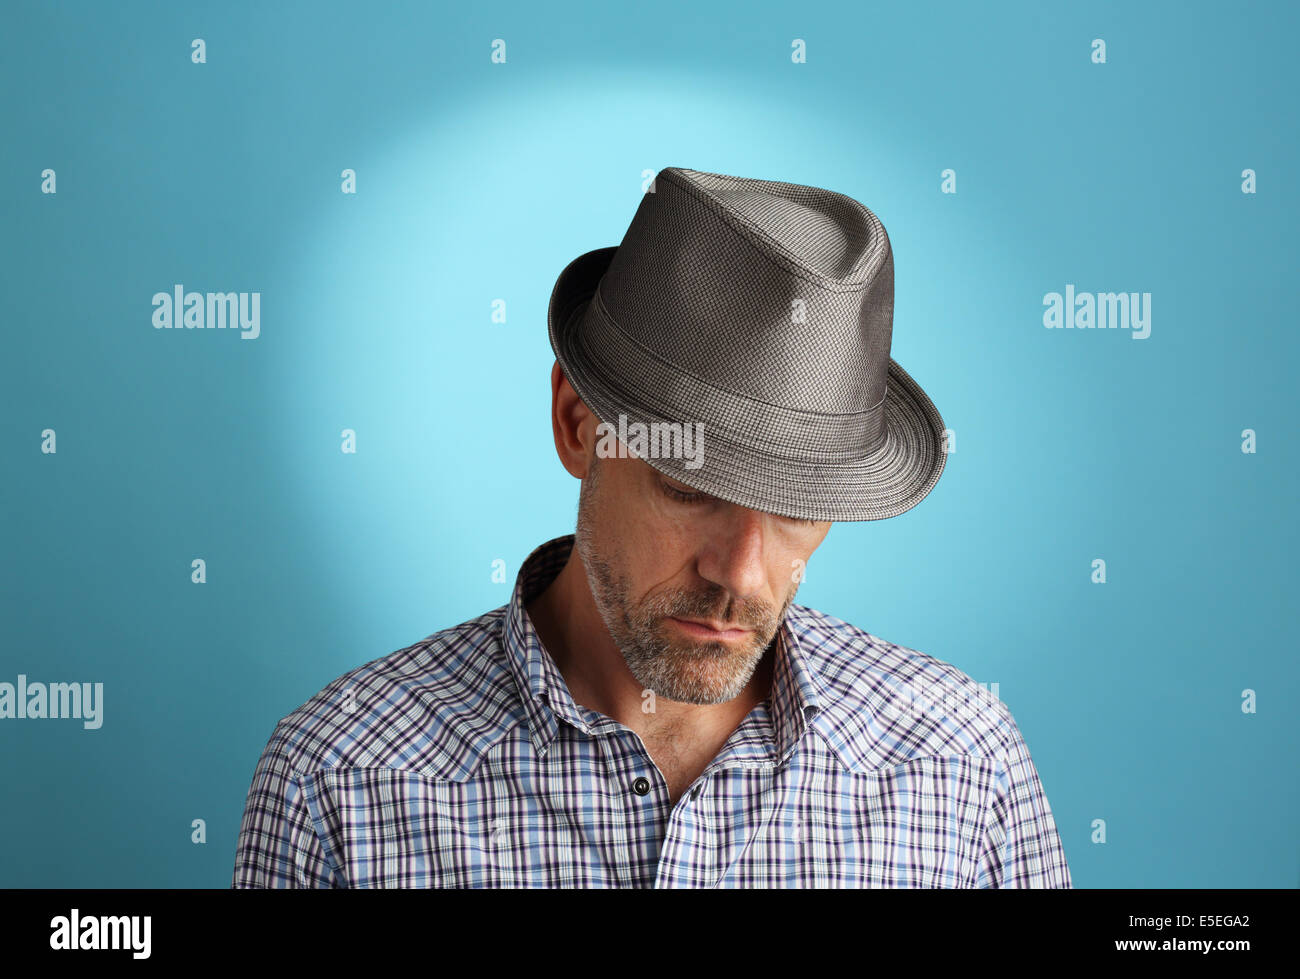 A portrait of a 40-something male wearing a fedora gazing down in thought. Stock Photo